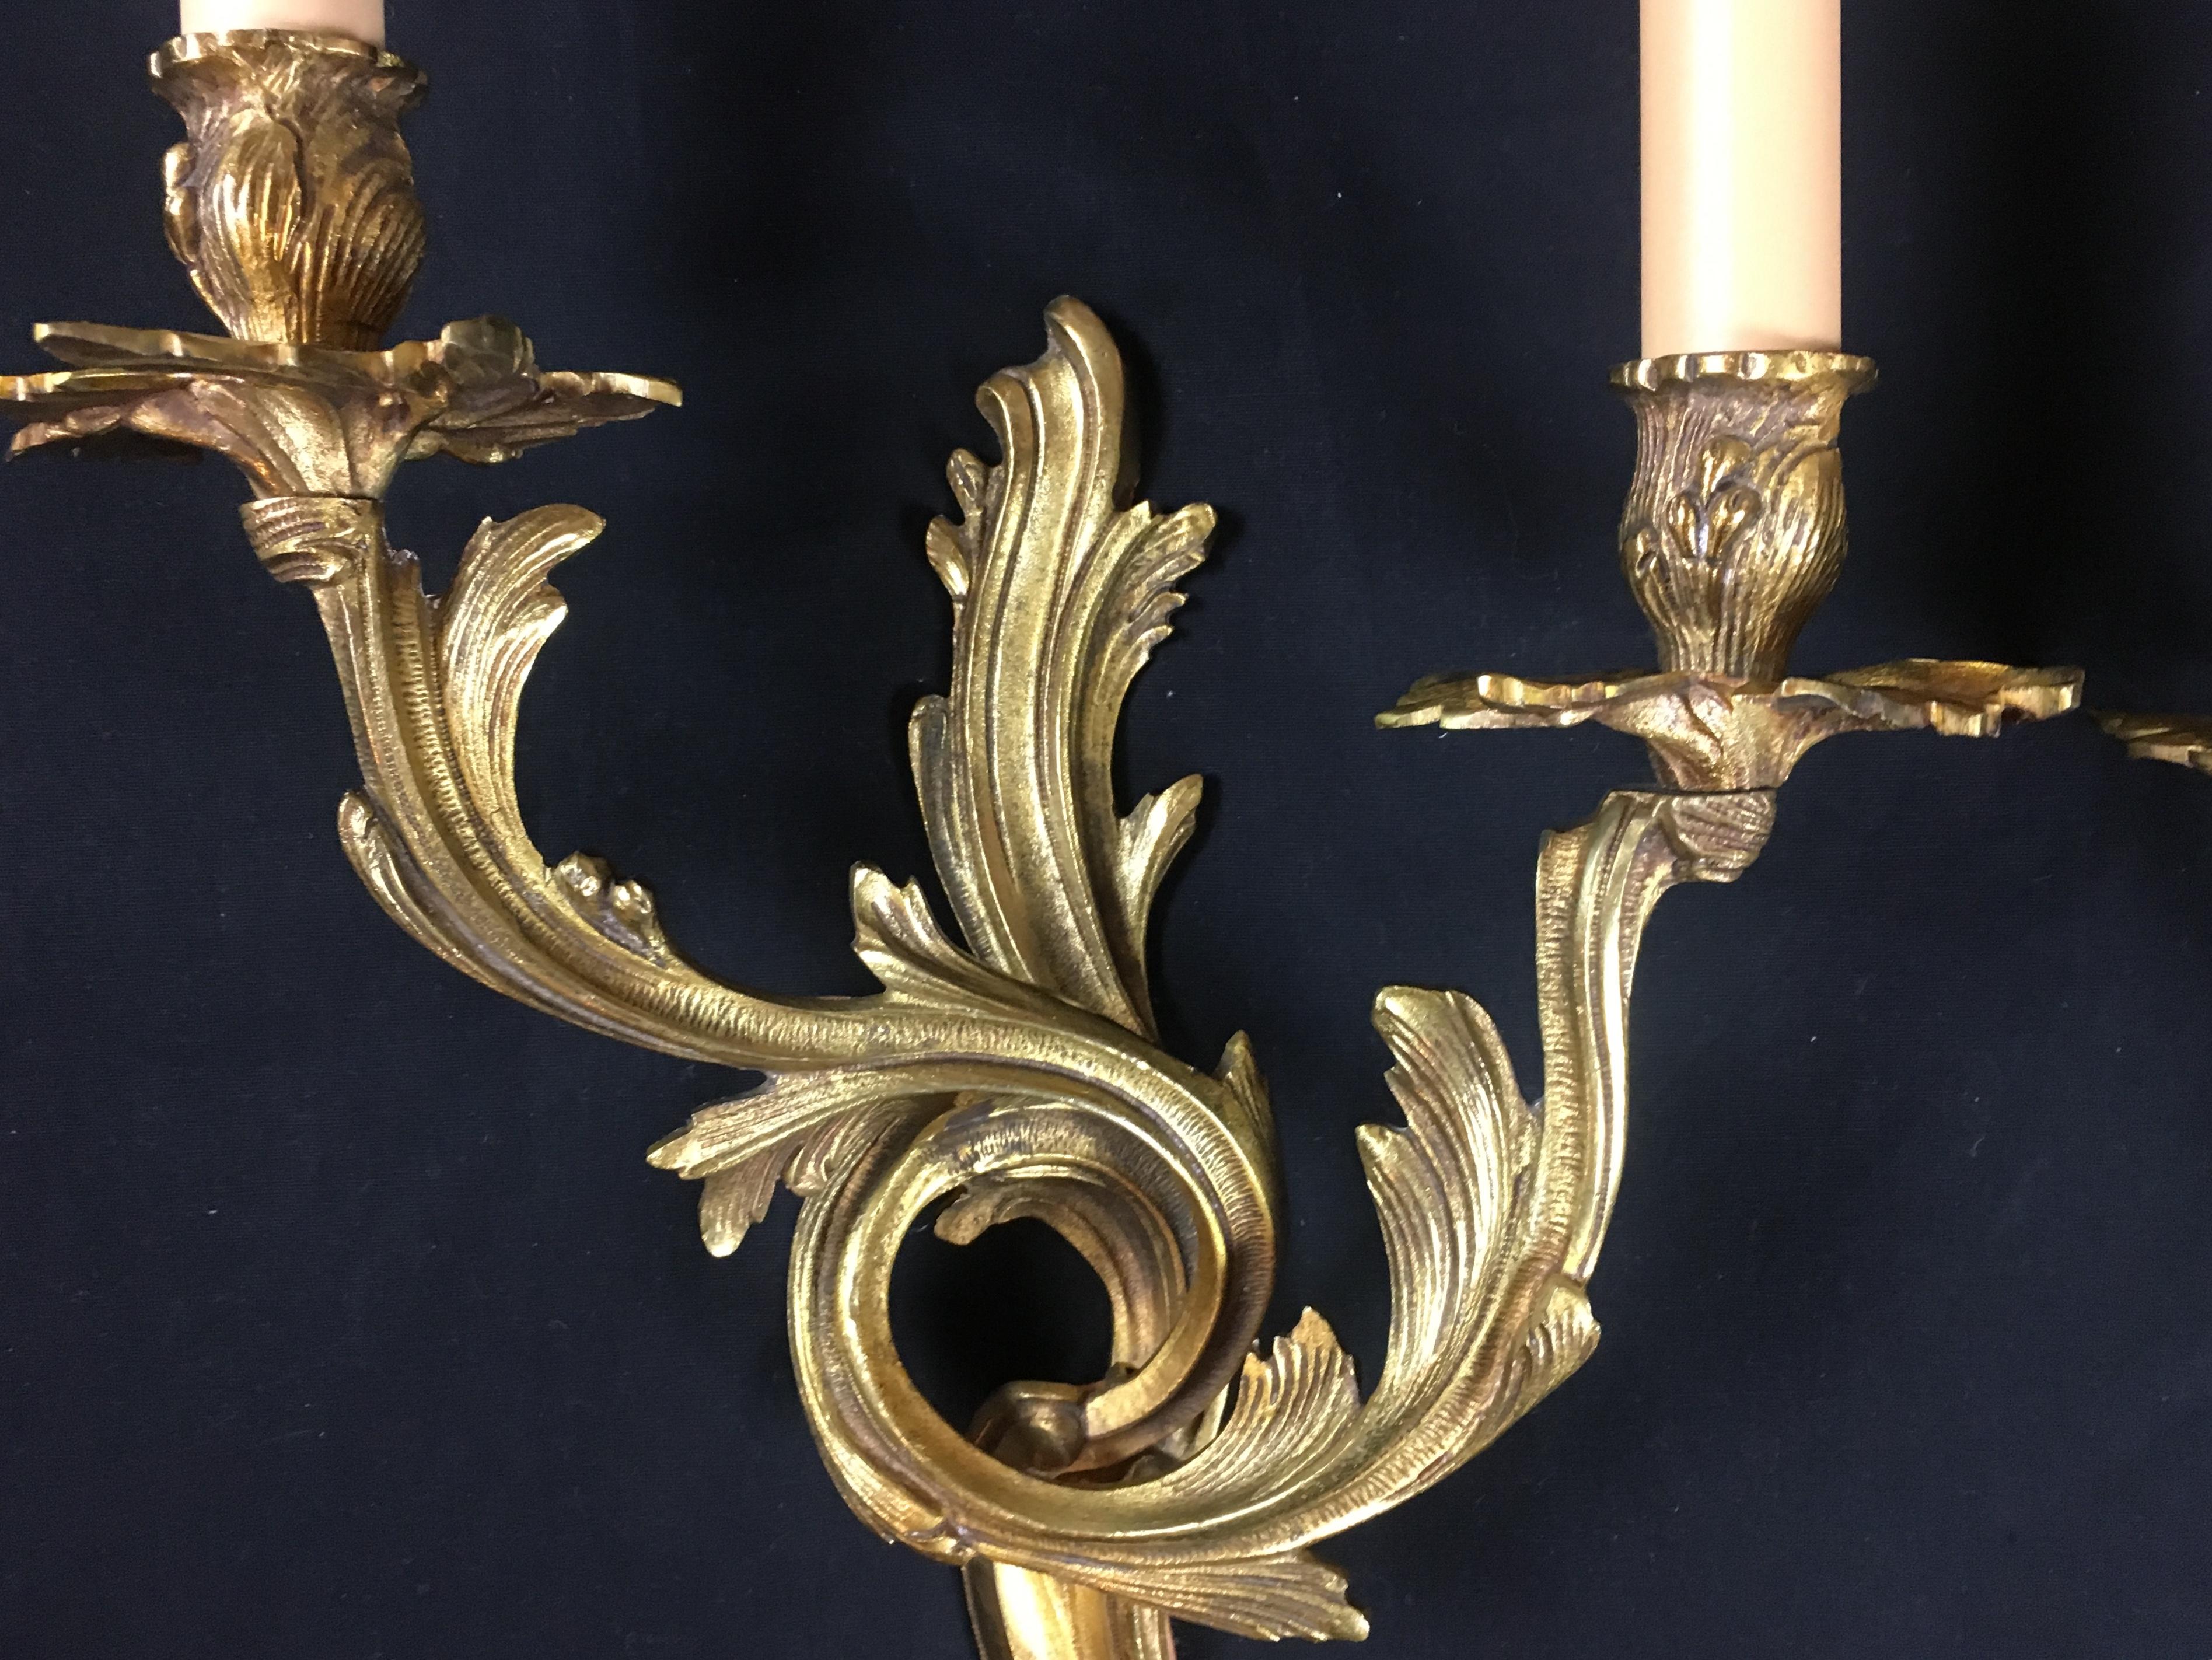 20th Century Pair of French Louis XV Style Rococo Gilt Bronze Two-Armed Sconces